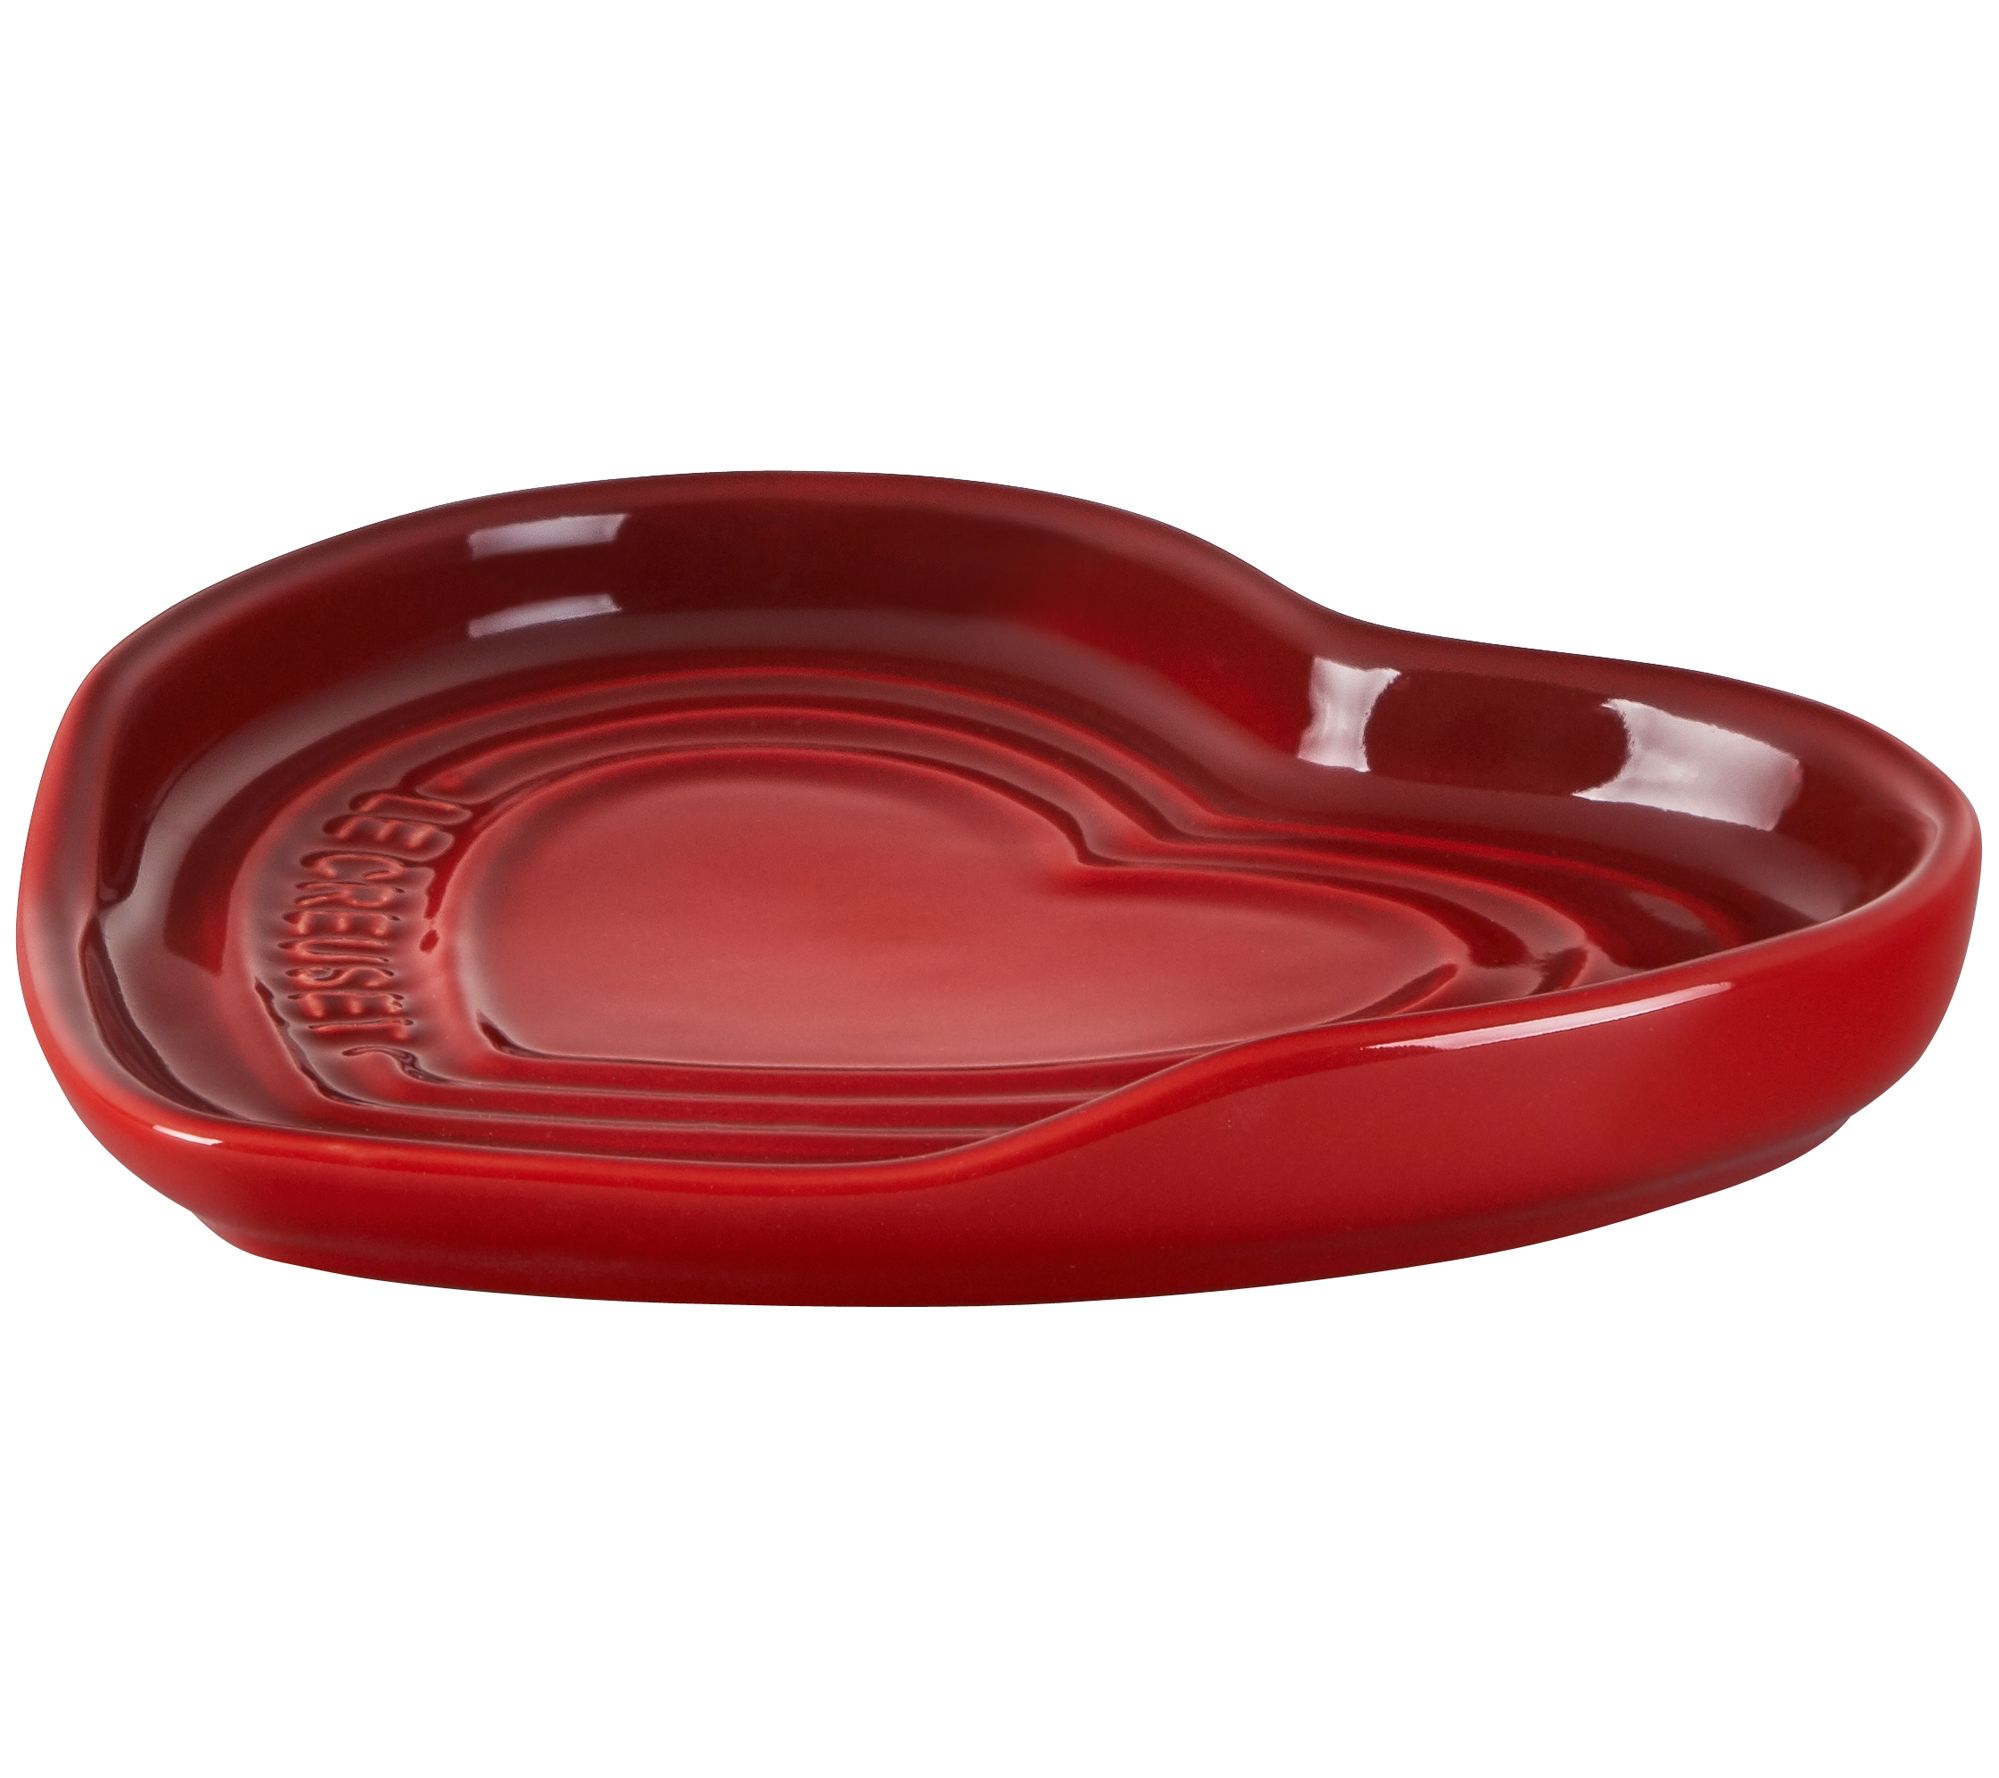 Le Creuset L'Amour Valentine's Day Heart-Shaped Spoon Rest 